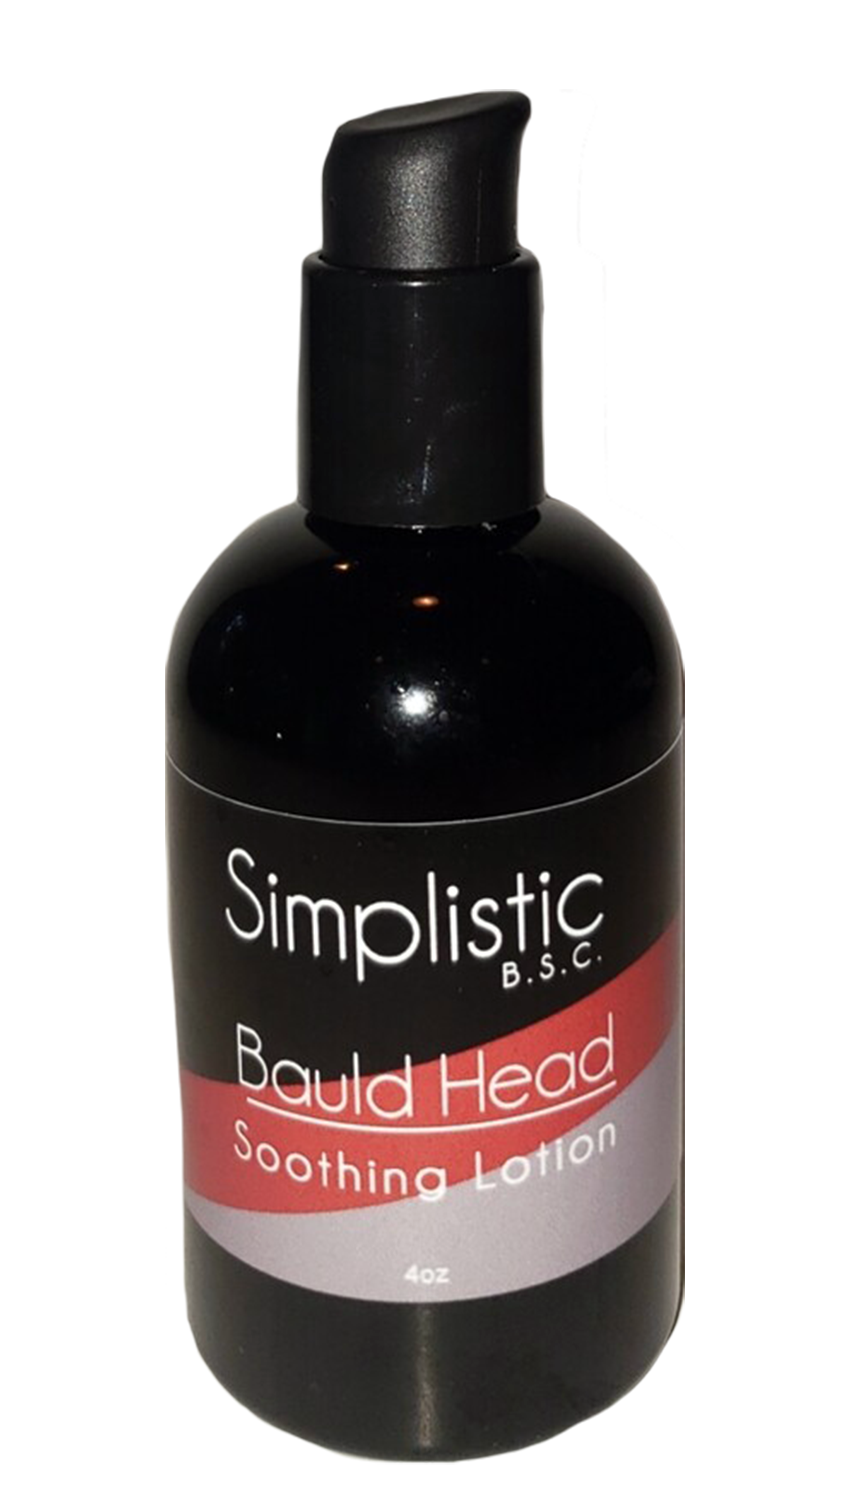 Bauld Head Soothing Lotion